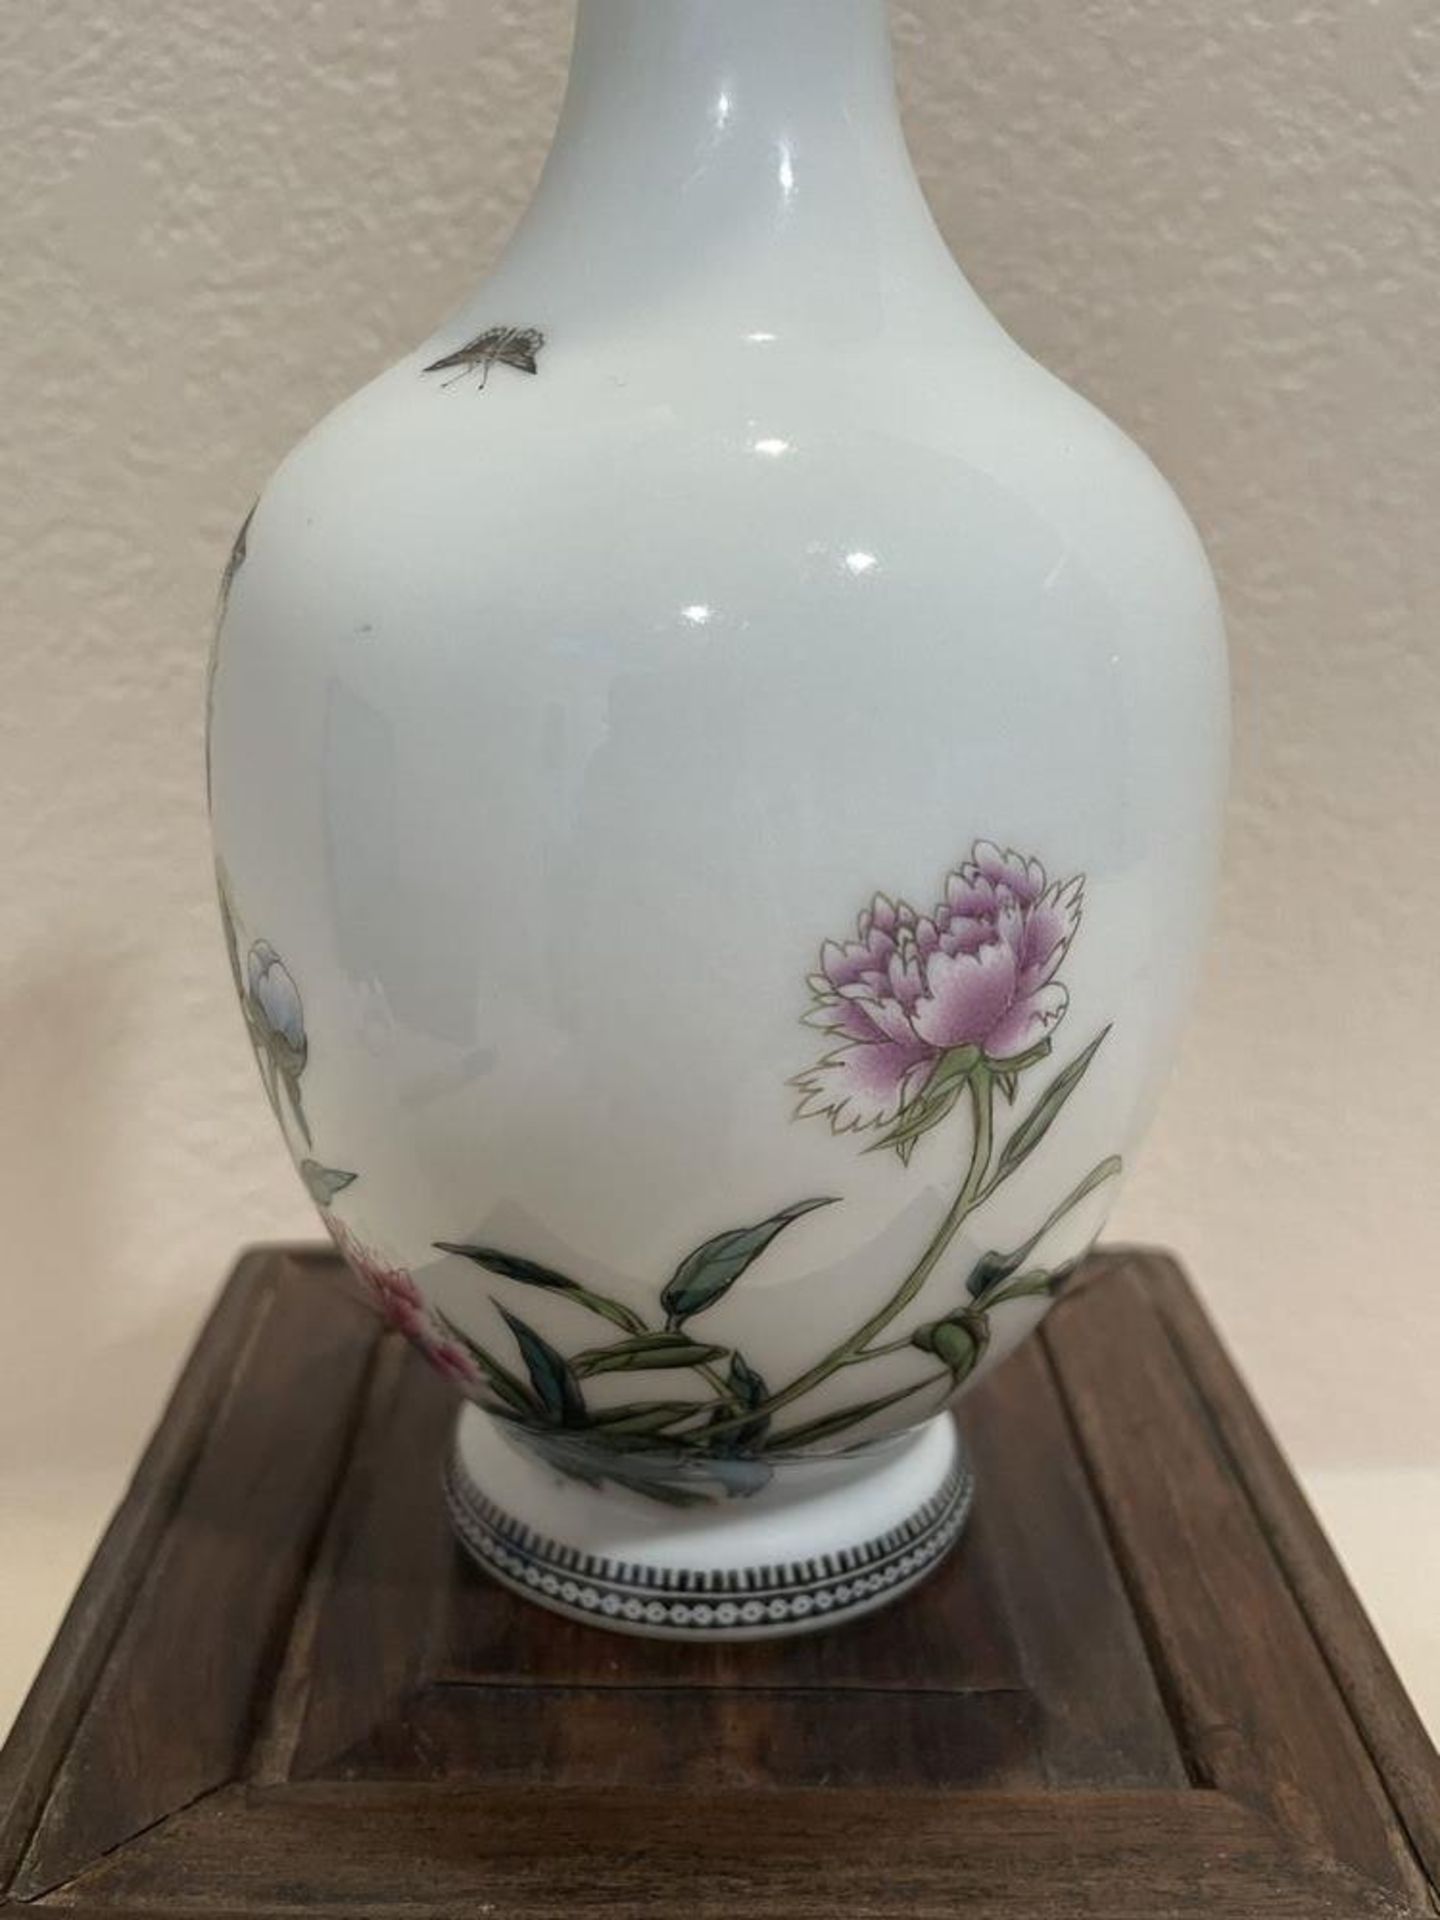 White East Asian Porcelin Vase with Cat and Flowers, Wood Base - 7" x 3.5" Vase, with base 10" x 5.5 - Image 5 of 8